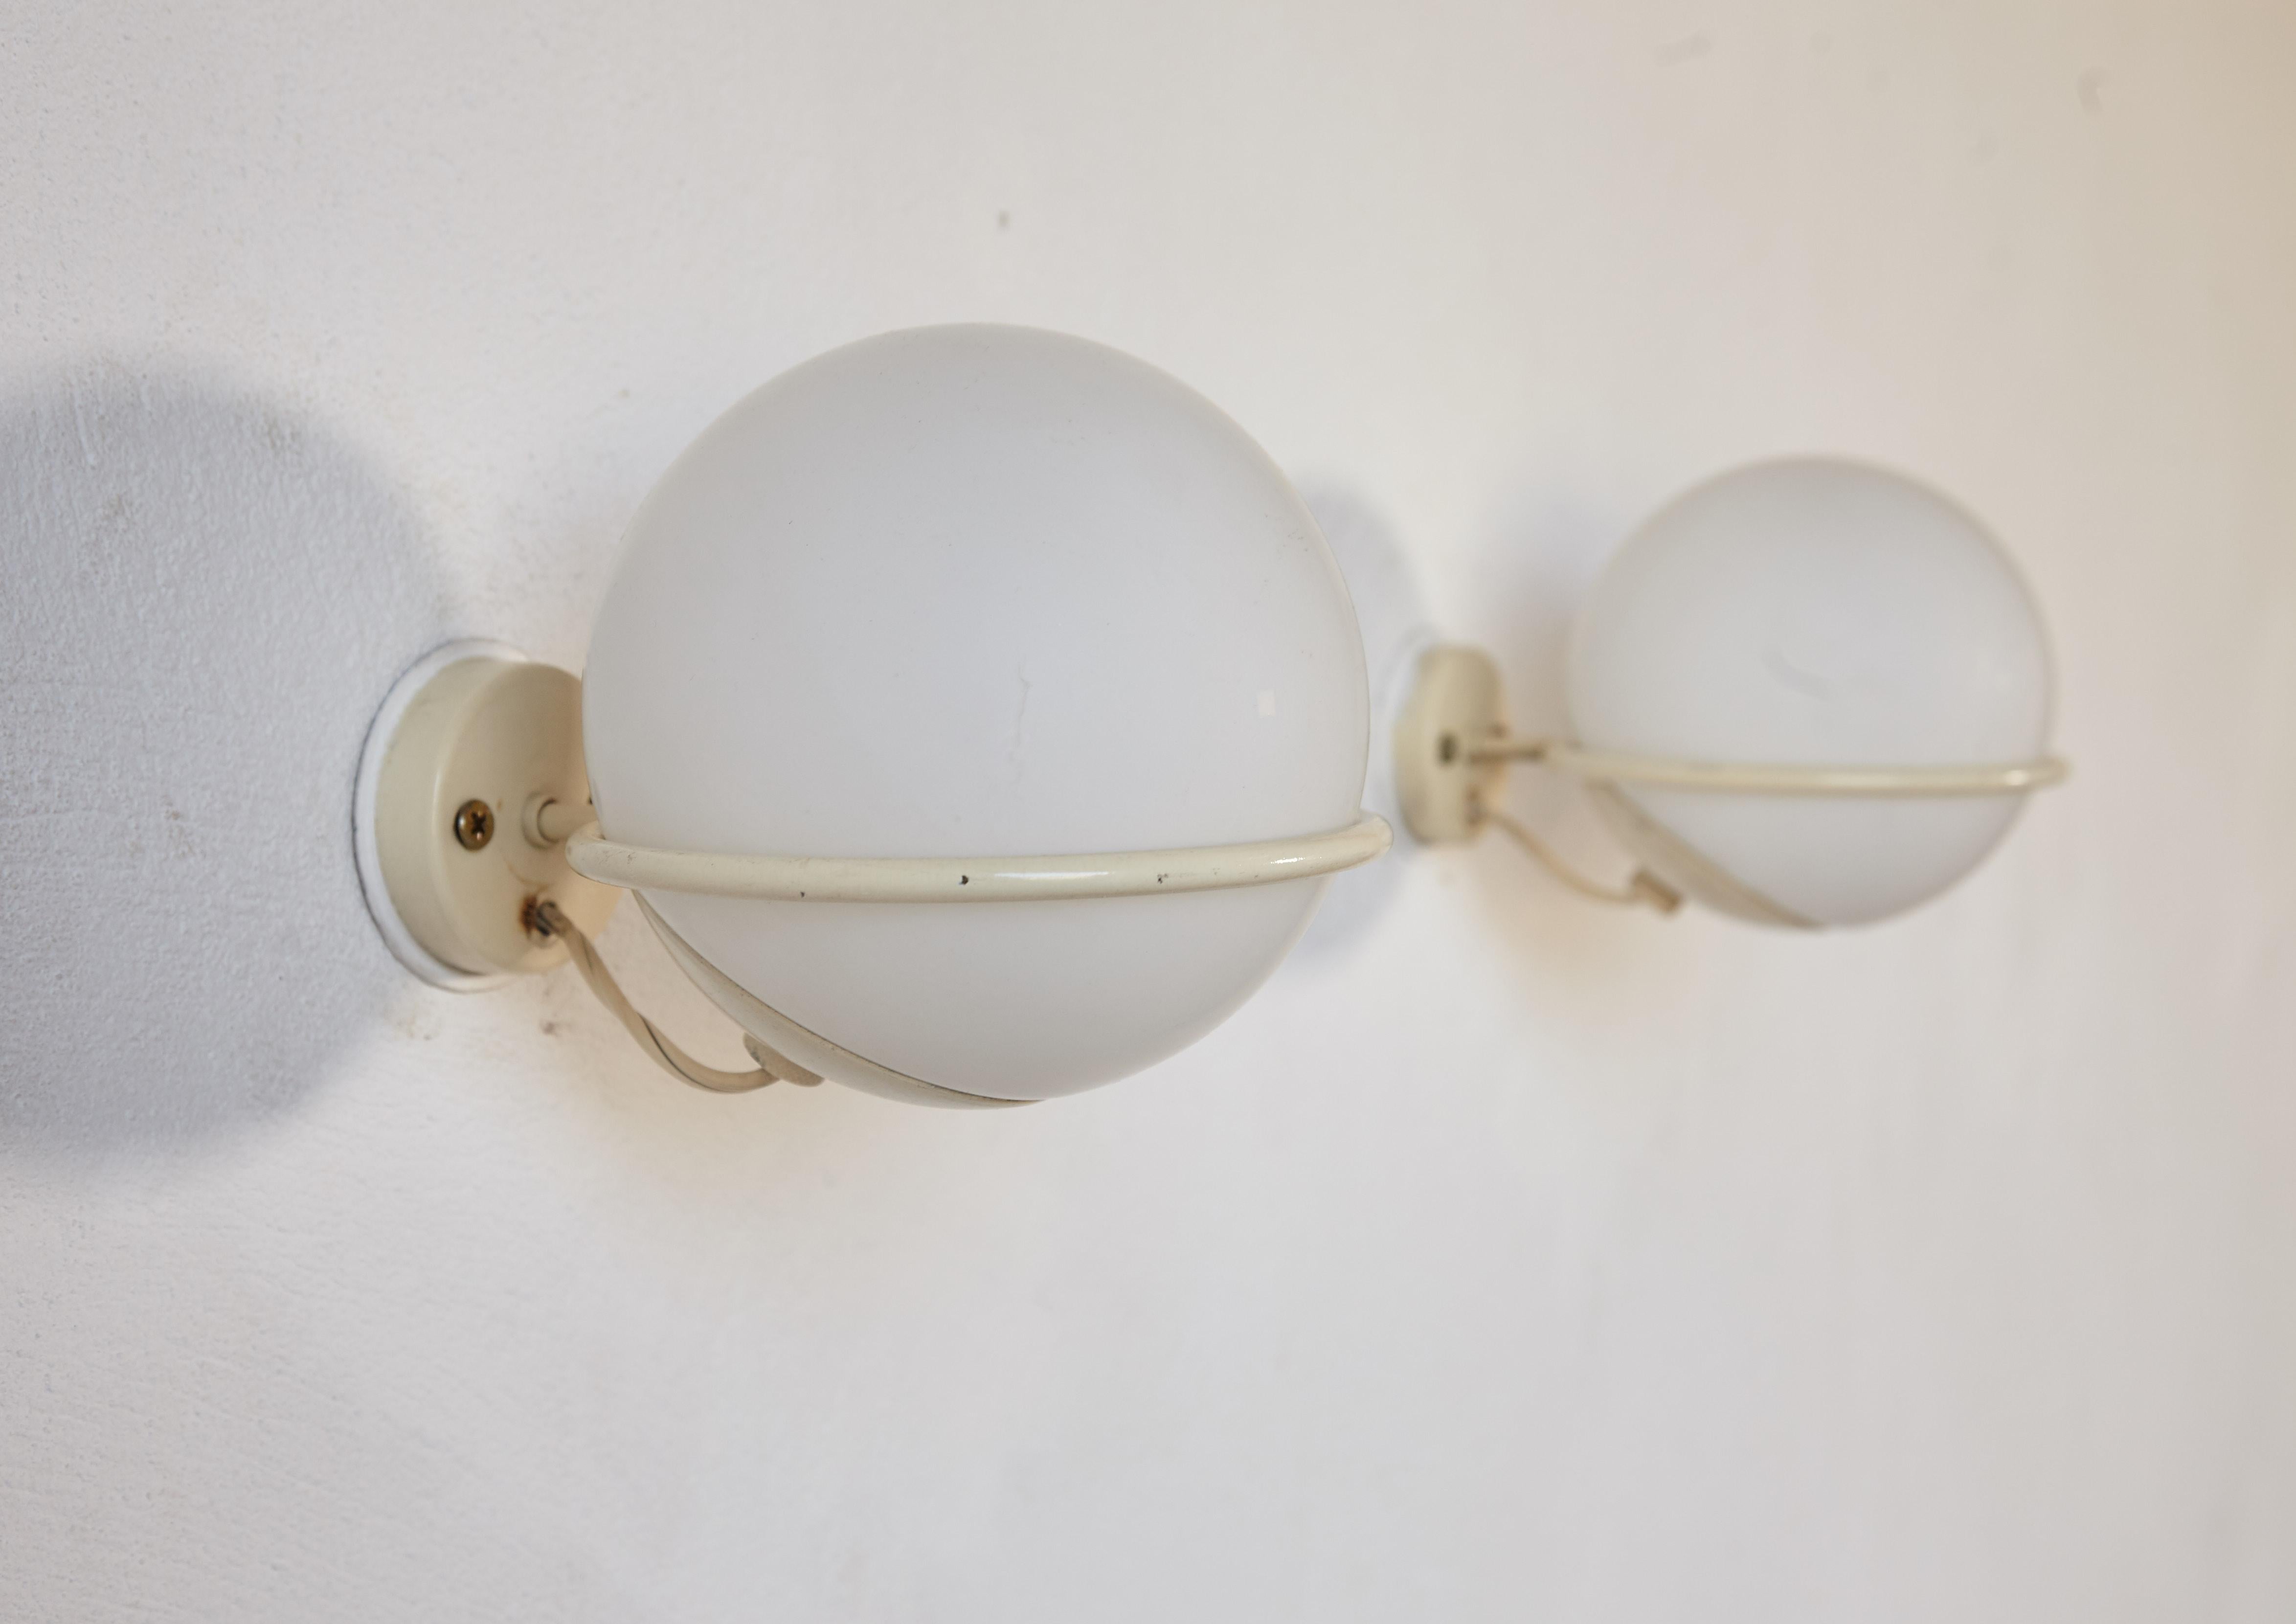 Pair of Gino Sarfatti wall lights, Model no. 238/1, Italy, 1960s. Glass and painted aluminium. Manufactured by Arteluce, Milan, Italy, with makers label. Local rewiring required prior to use. Fast and inexpensive shipping worldwide.